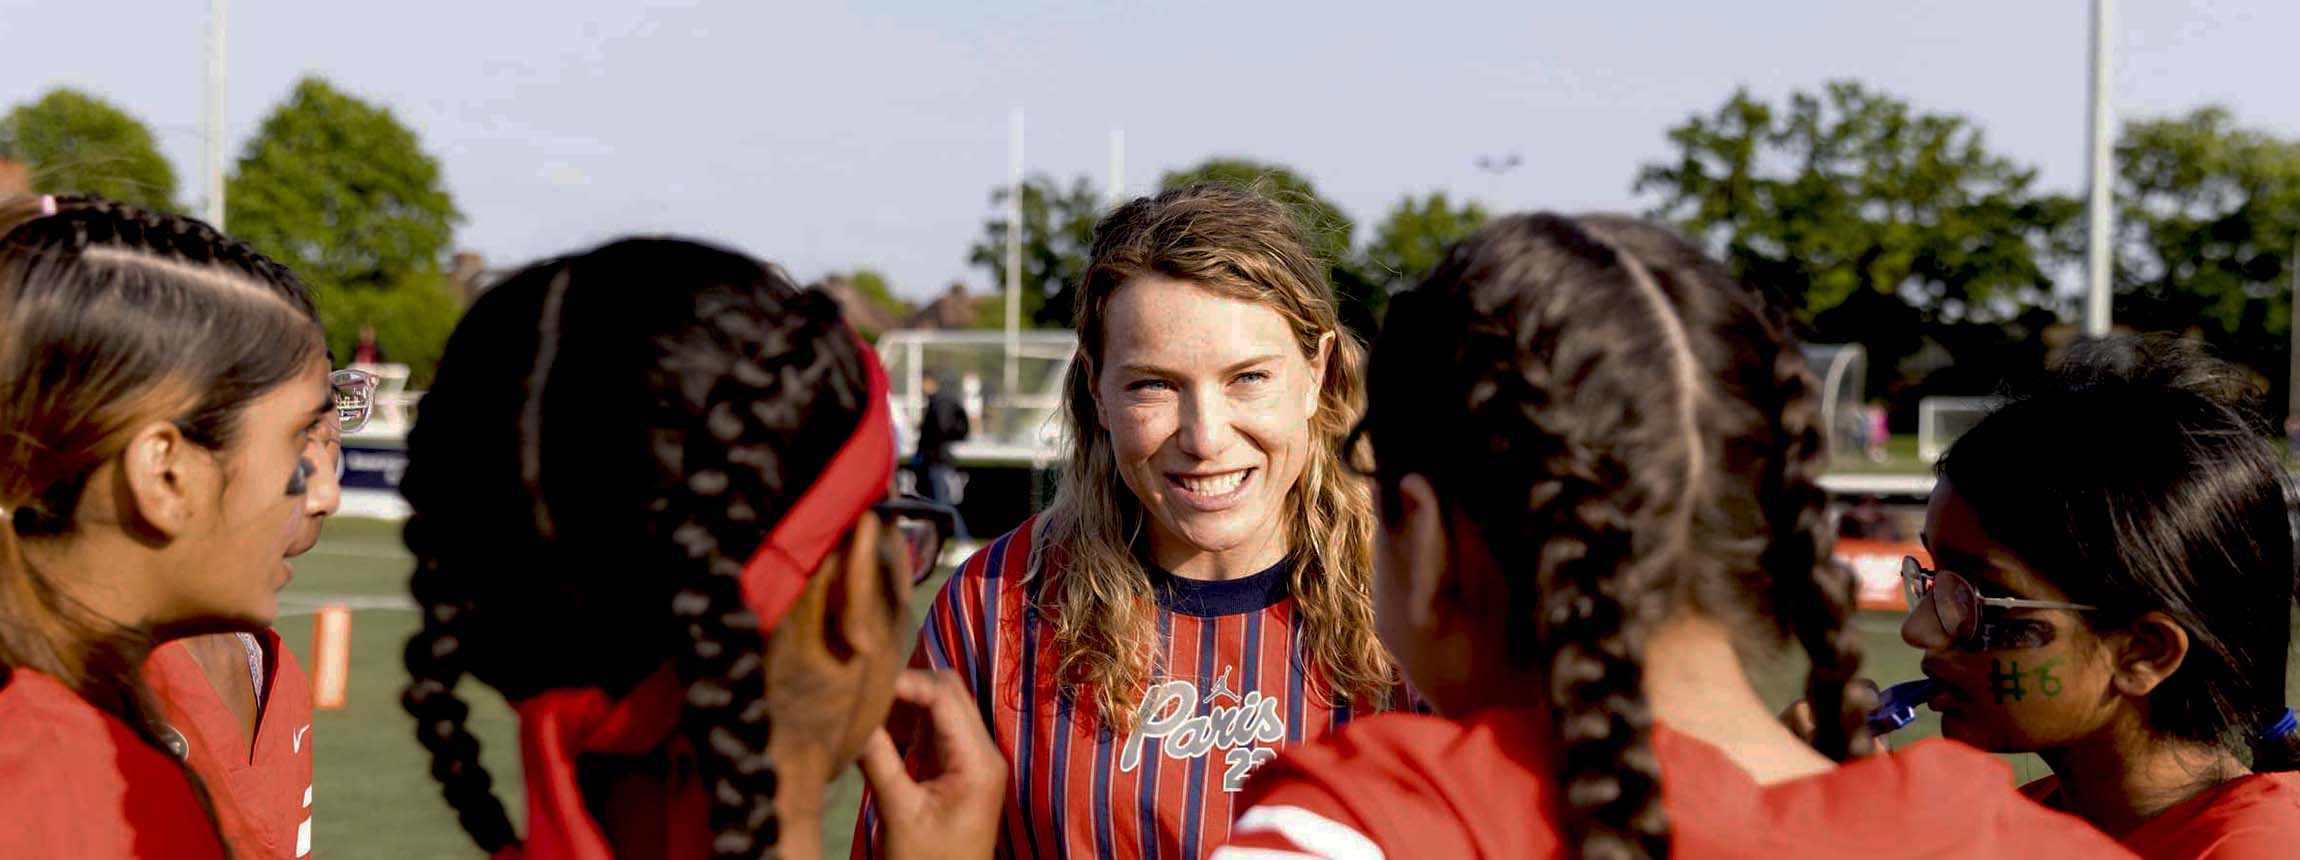 Phoebe schecter speaks to young female american footballers in the uk